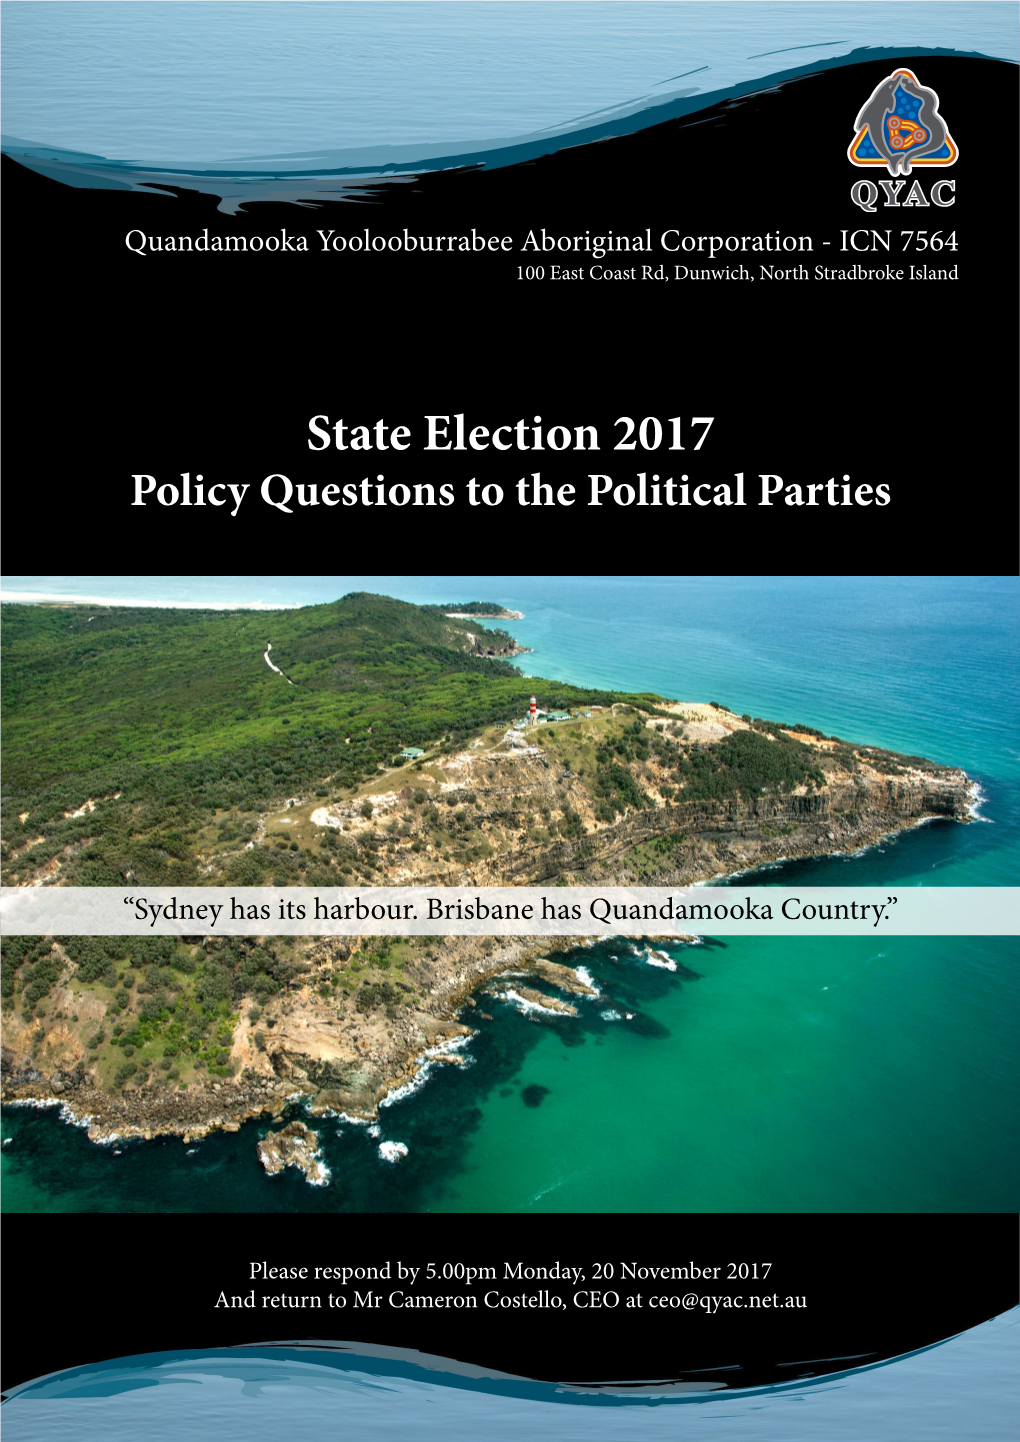 State Election 2017 Policy Questions to the Political Parties